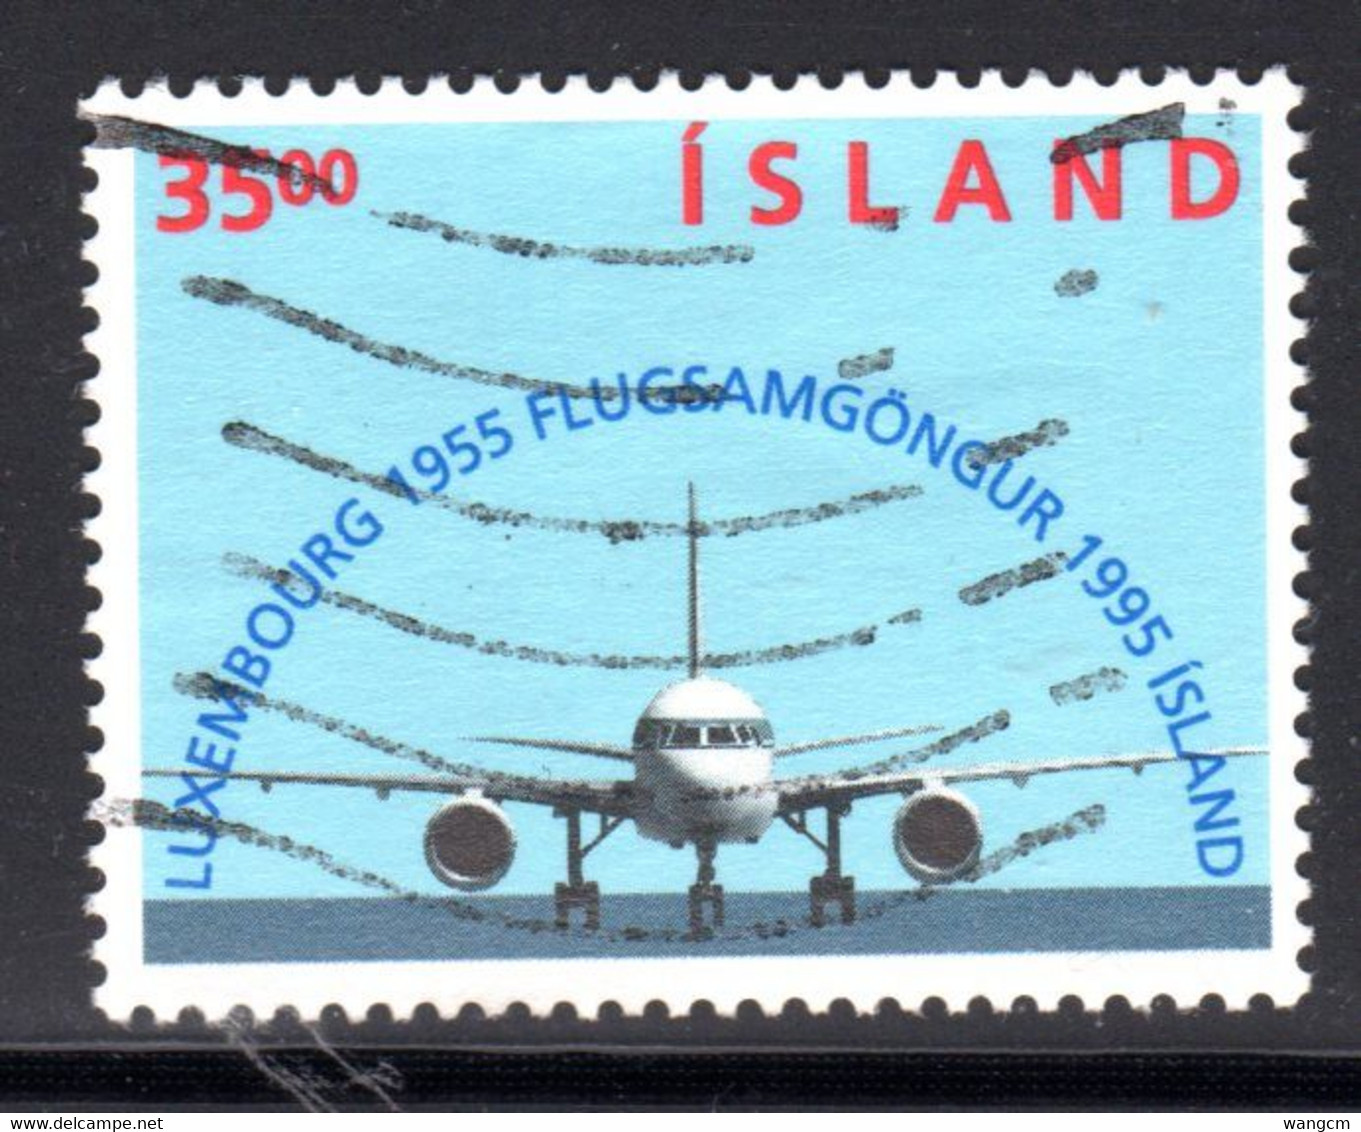 Iceland 1995 35k Iceland - Luxembourg Air Link Fine Used - Usati